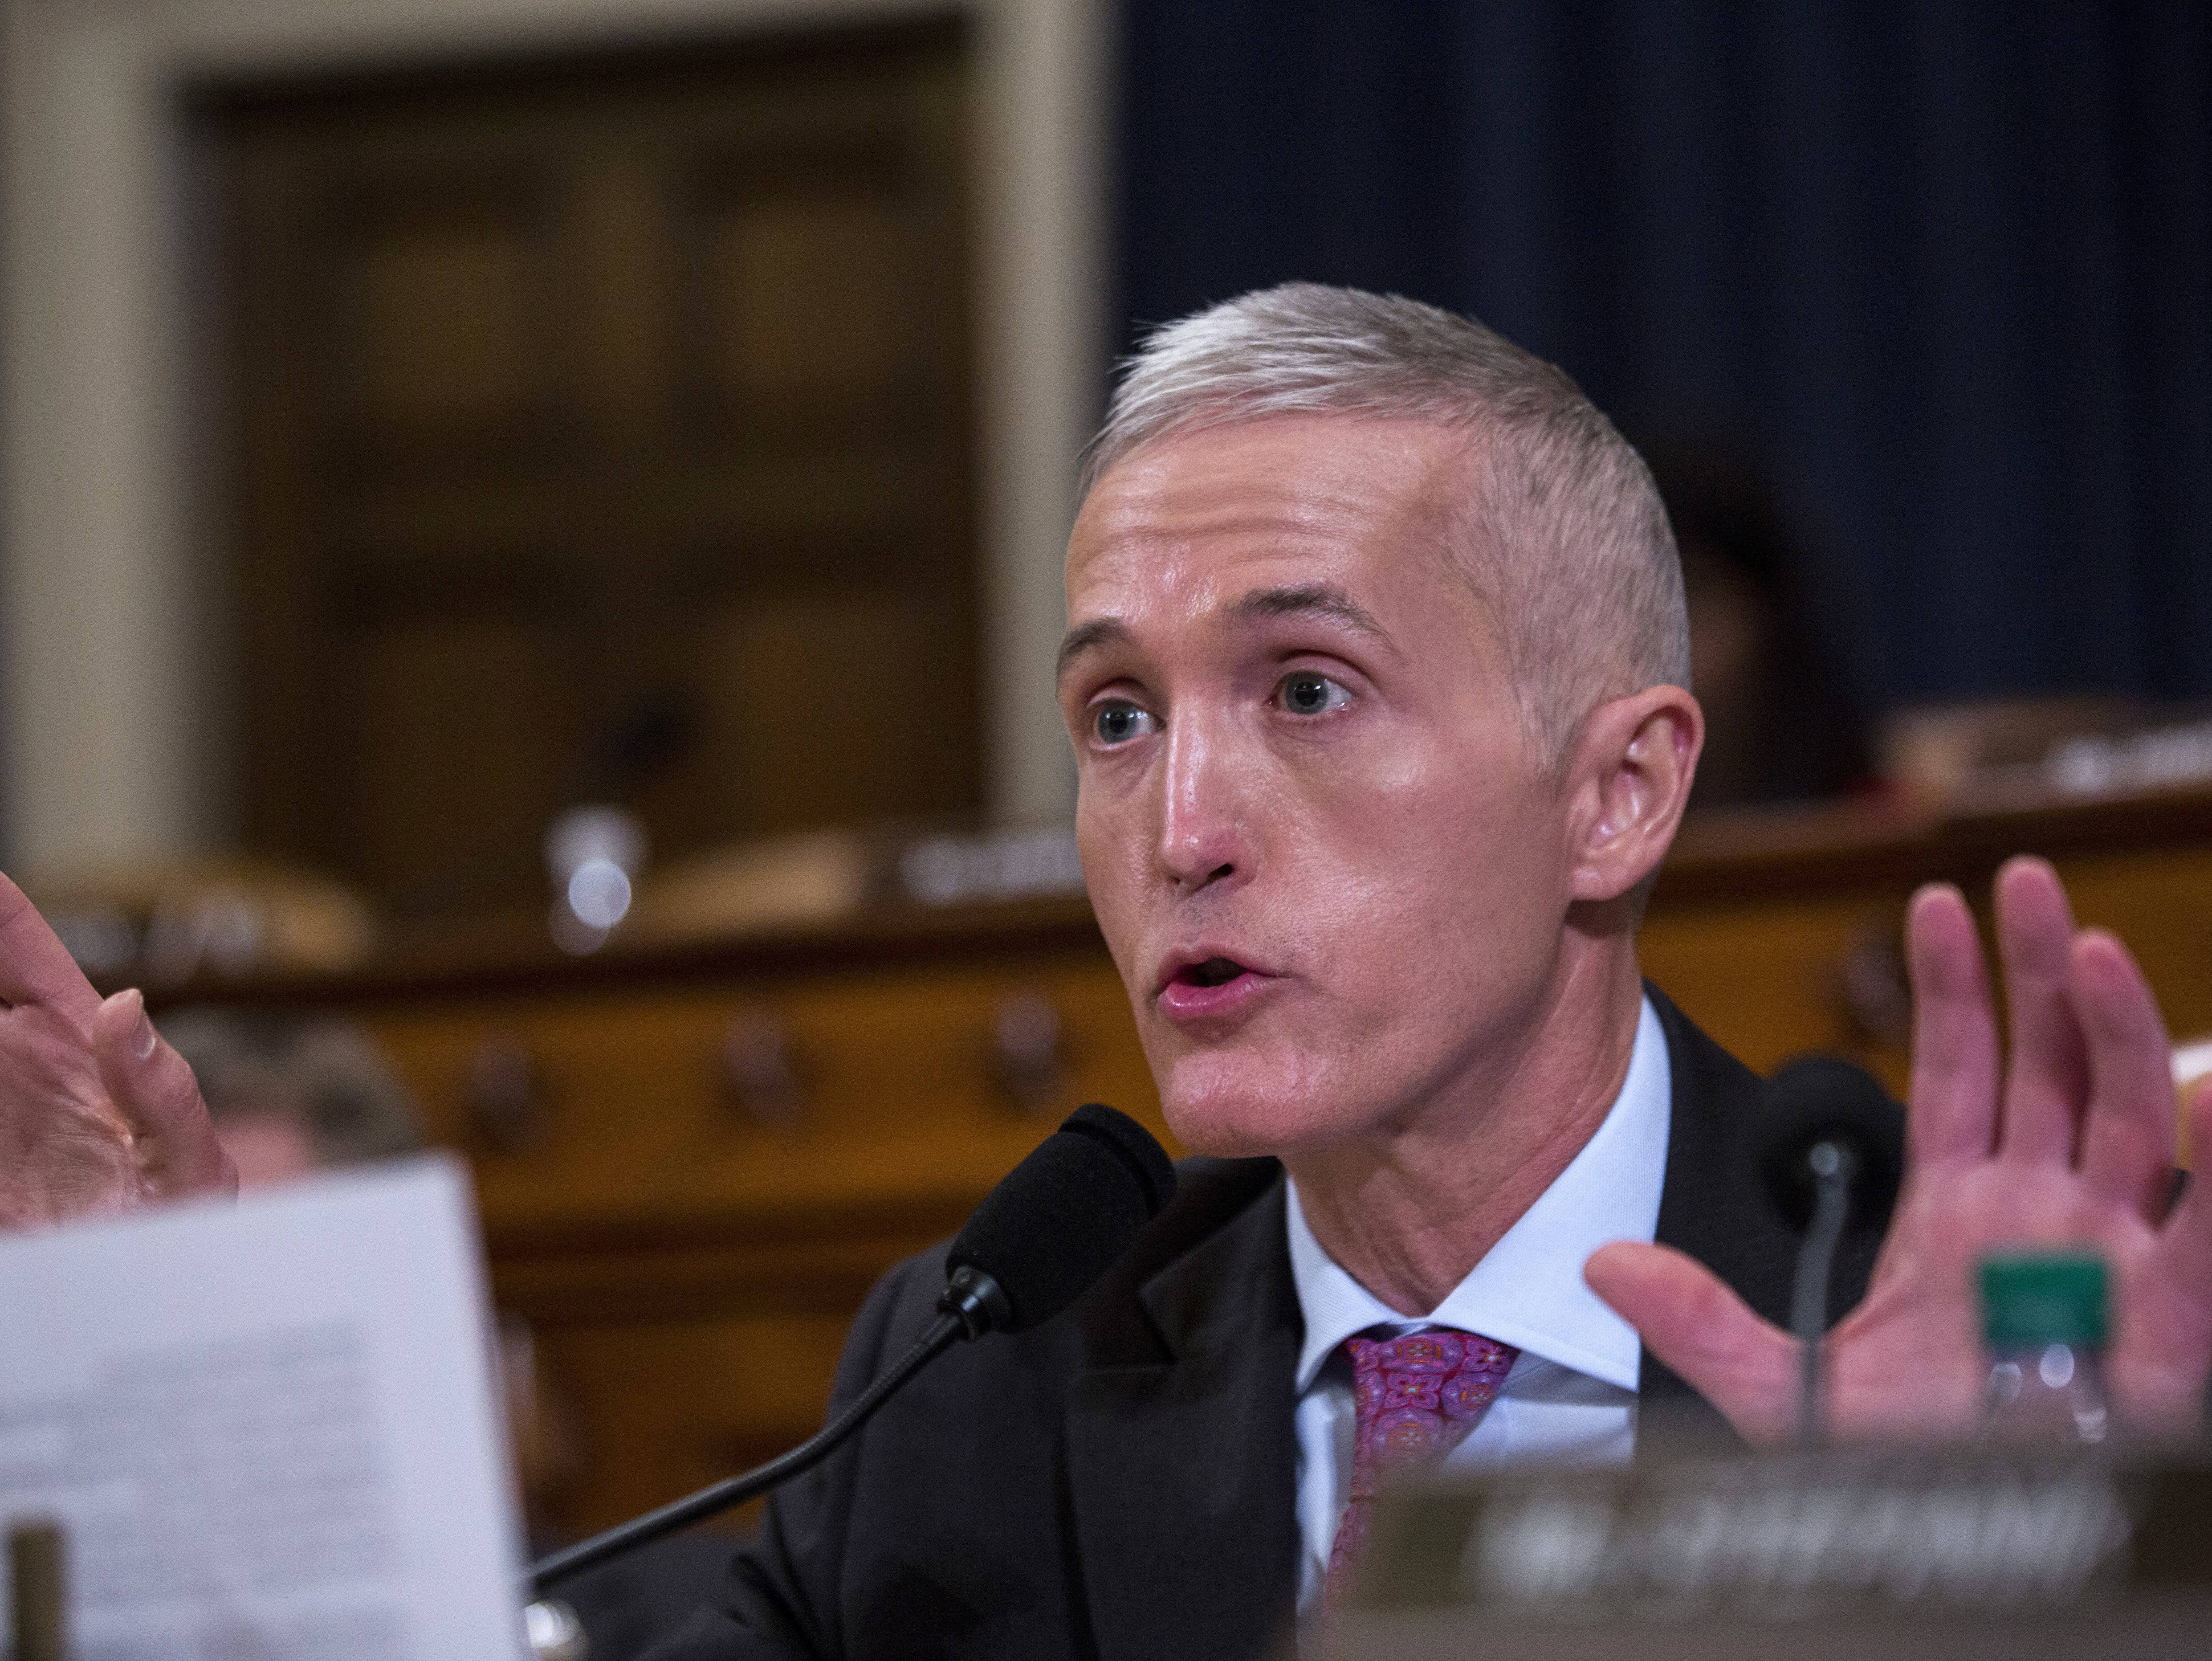 WASHINGTON, D.C. - MARCH 20: Rep. Trey Gowdy (R-SC) speaks a House Permanent Select Committee on Intelligence hearing concerning Russian meddling in the 2016 United States election, on Capitol Hill, March 20, 2017 in Washington, DC. While both the Senate and House Intelligence committees have received private intelligence briefings in recent months, Monday's hearing is the first public hearing on alleged Russian attempts to interfere in the 2016 election. (Photo by Zach Gibson/Getty Images)